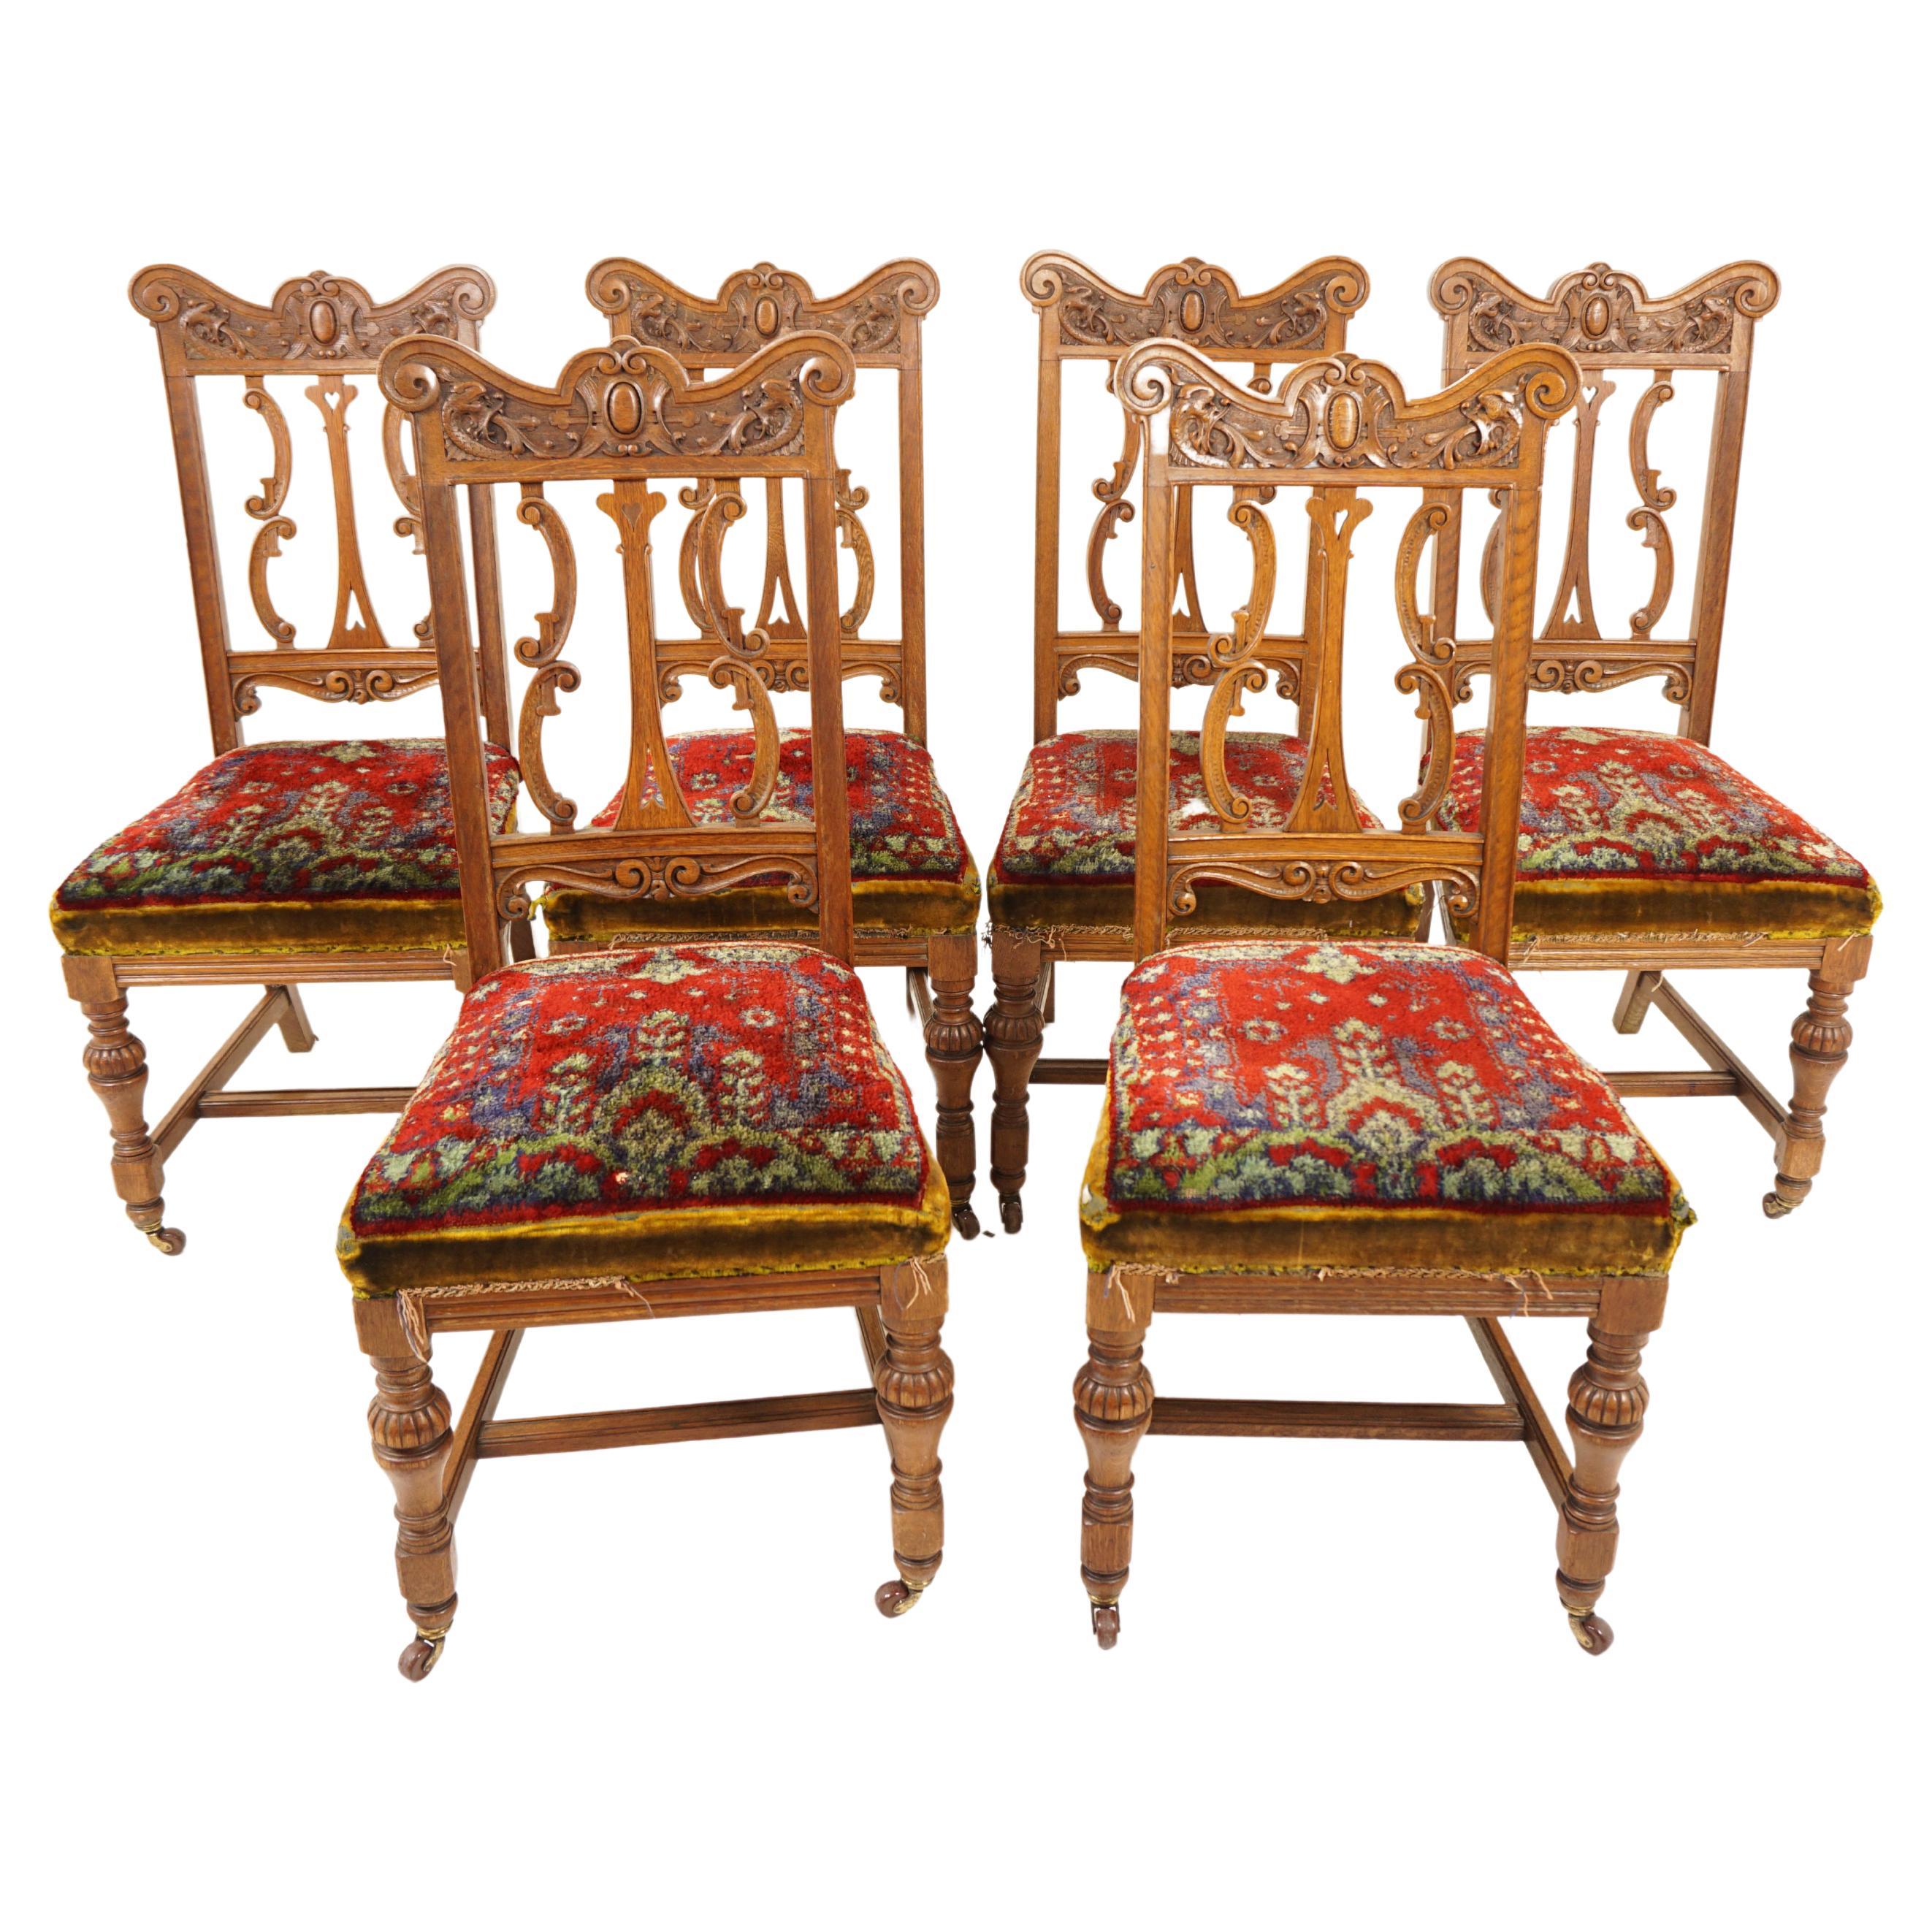 6 Heavily Carved Victorian Oak Upholstered Dining Chairs, Scotland 1880, H994